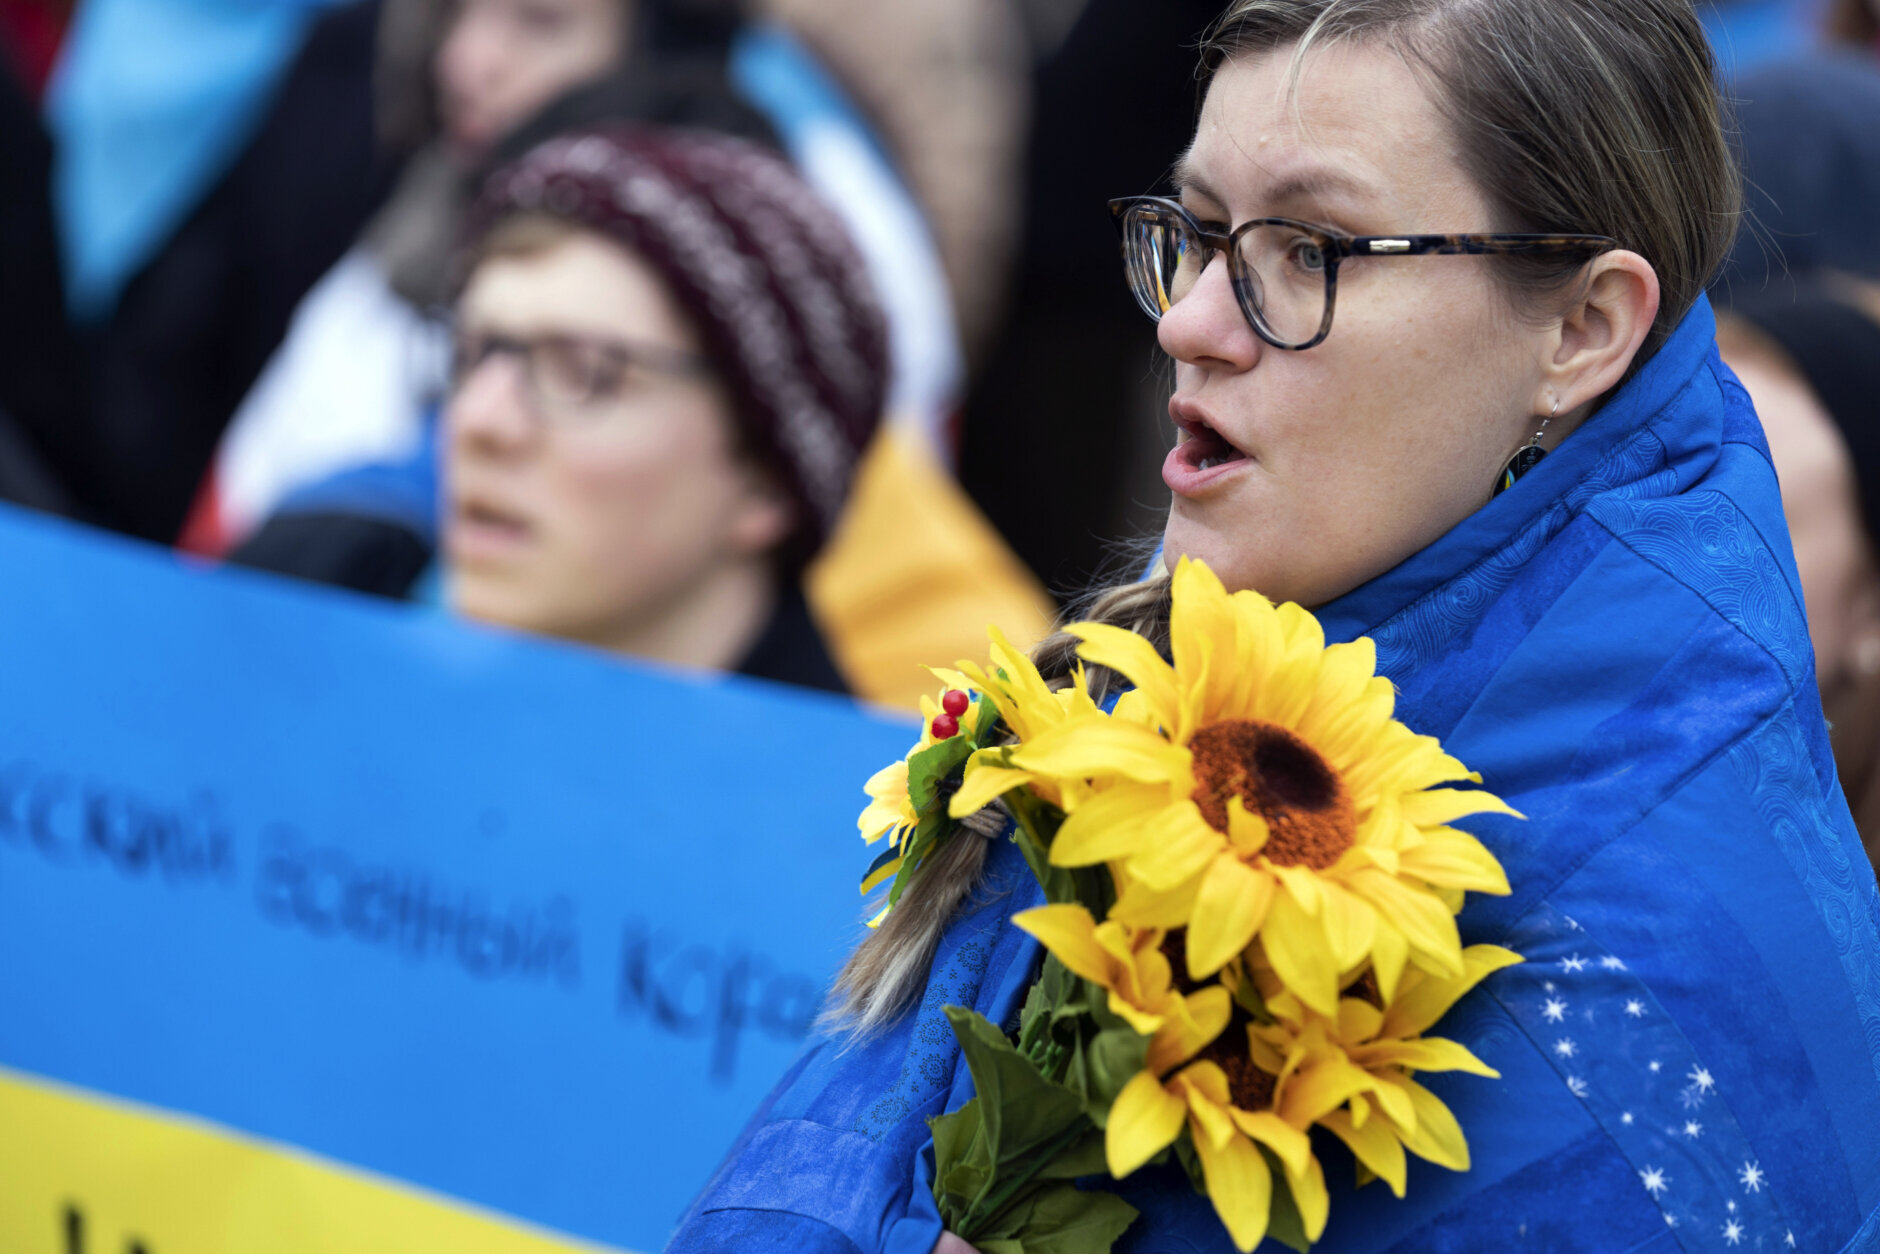 Demonstrators rally at the Lincoln Memorial in support of Ukraine, in Washington, Saturday, Feb. 25, 2023. (AP Photo/Jose Luis Magana)